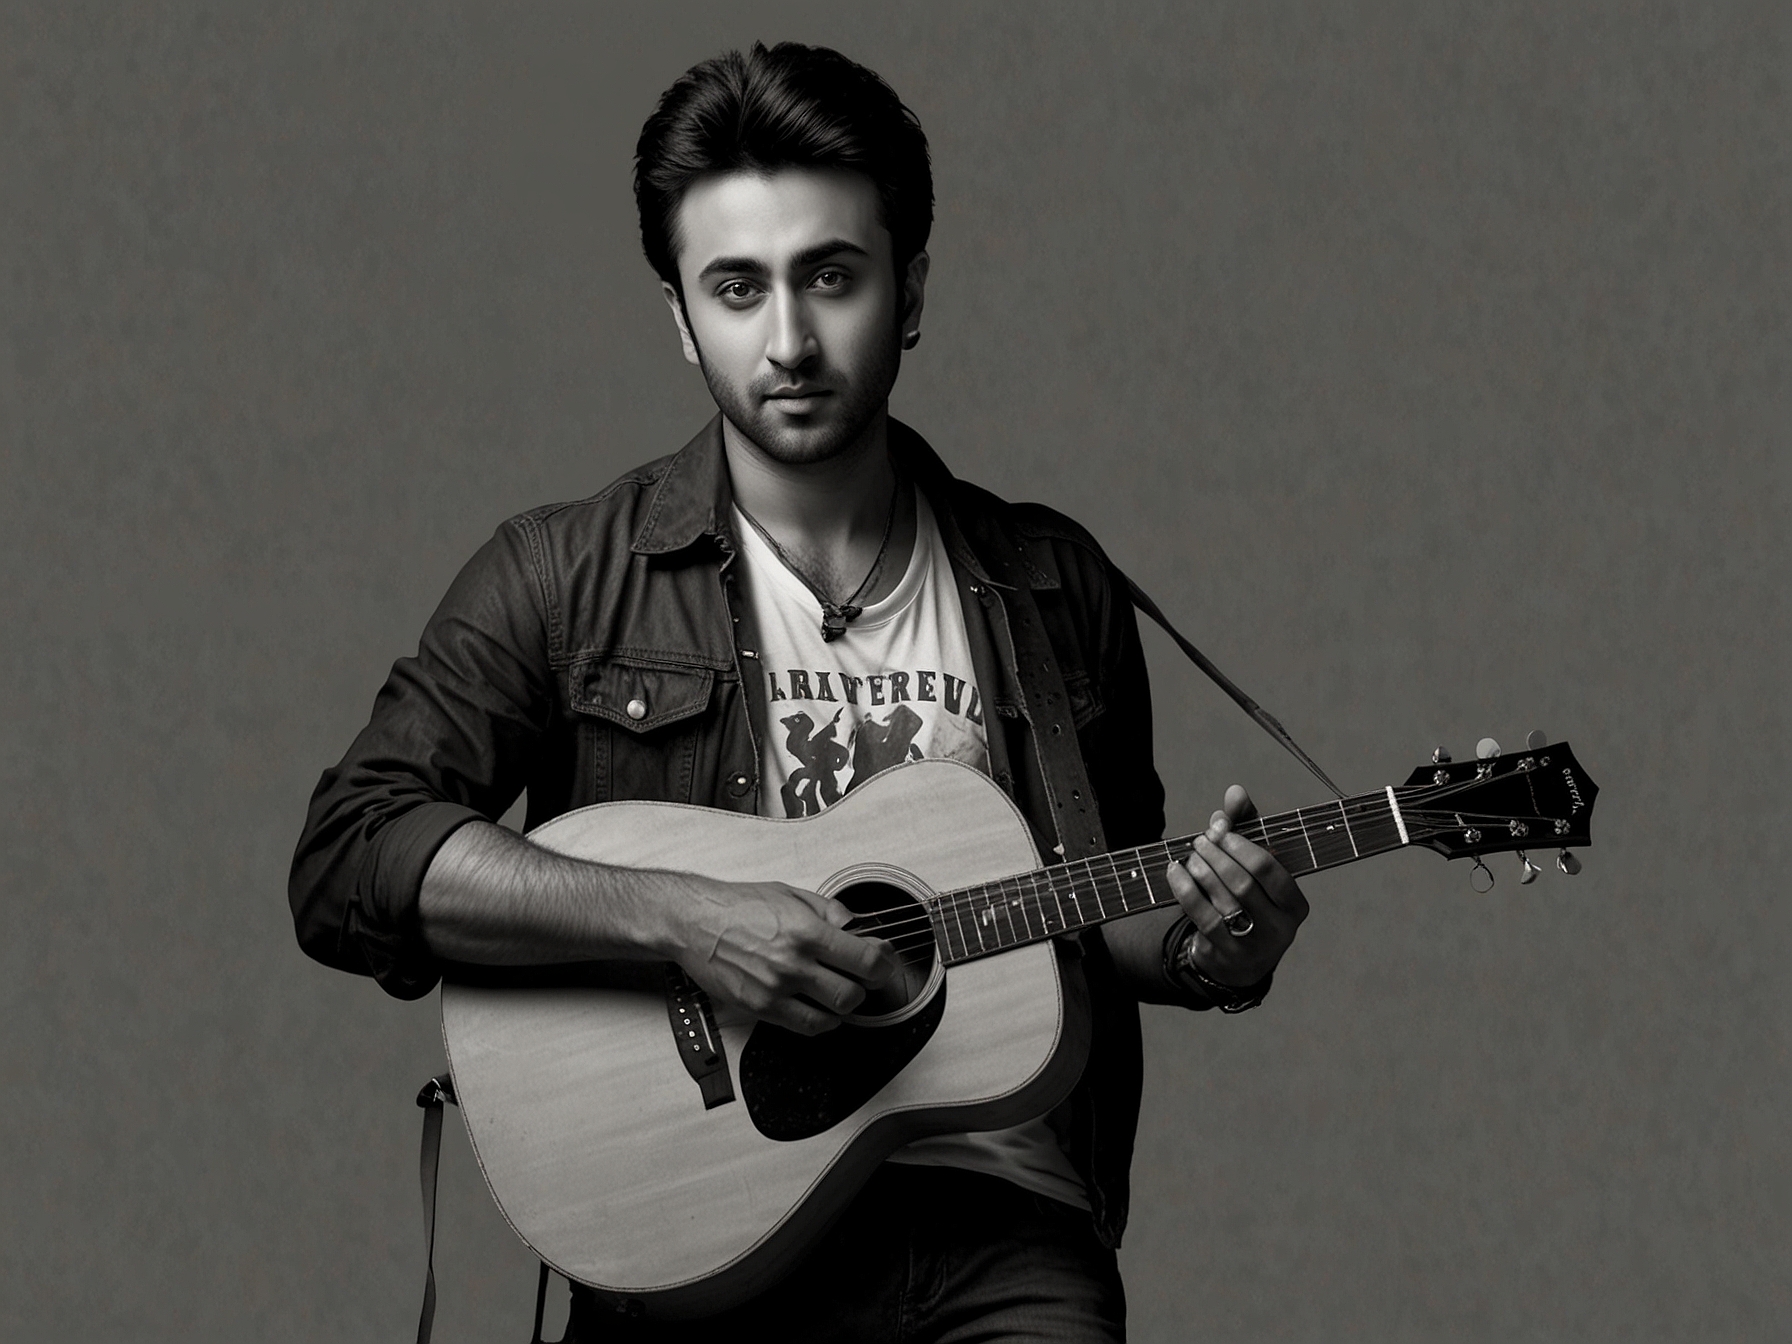 Ranbir Kapoor, dressed in grunge-inspired attire with a guitar, channels his 'Rockstar' character Janardhan Jakhar in an intense, unreleased ad shoot, evoking strong nostalgia.